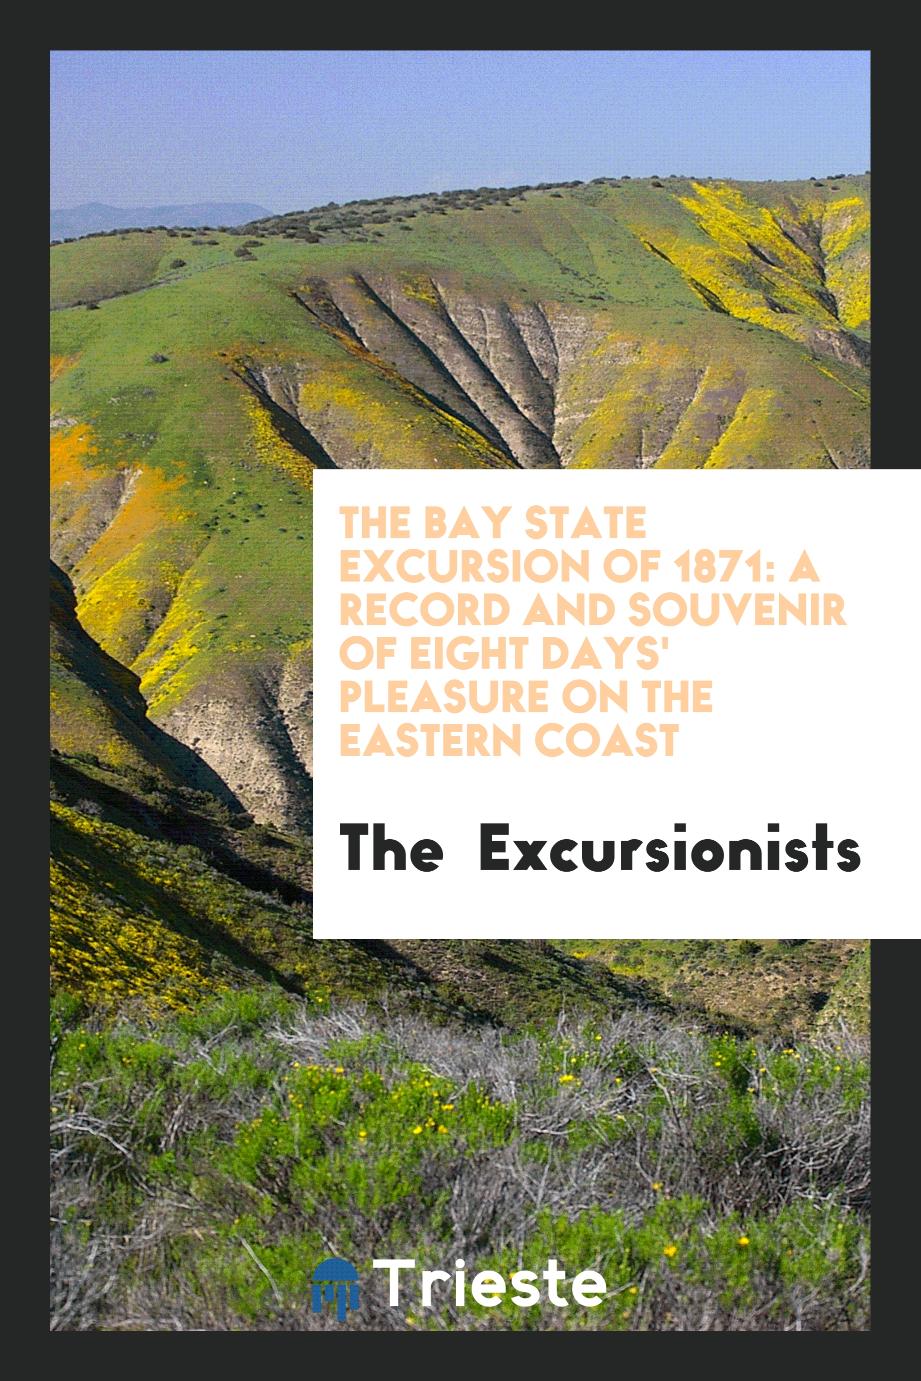 The Bay State Excursion of 1871: A Record and Souvenir of Eight Days' Pleasure on the Eastern Coast